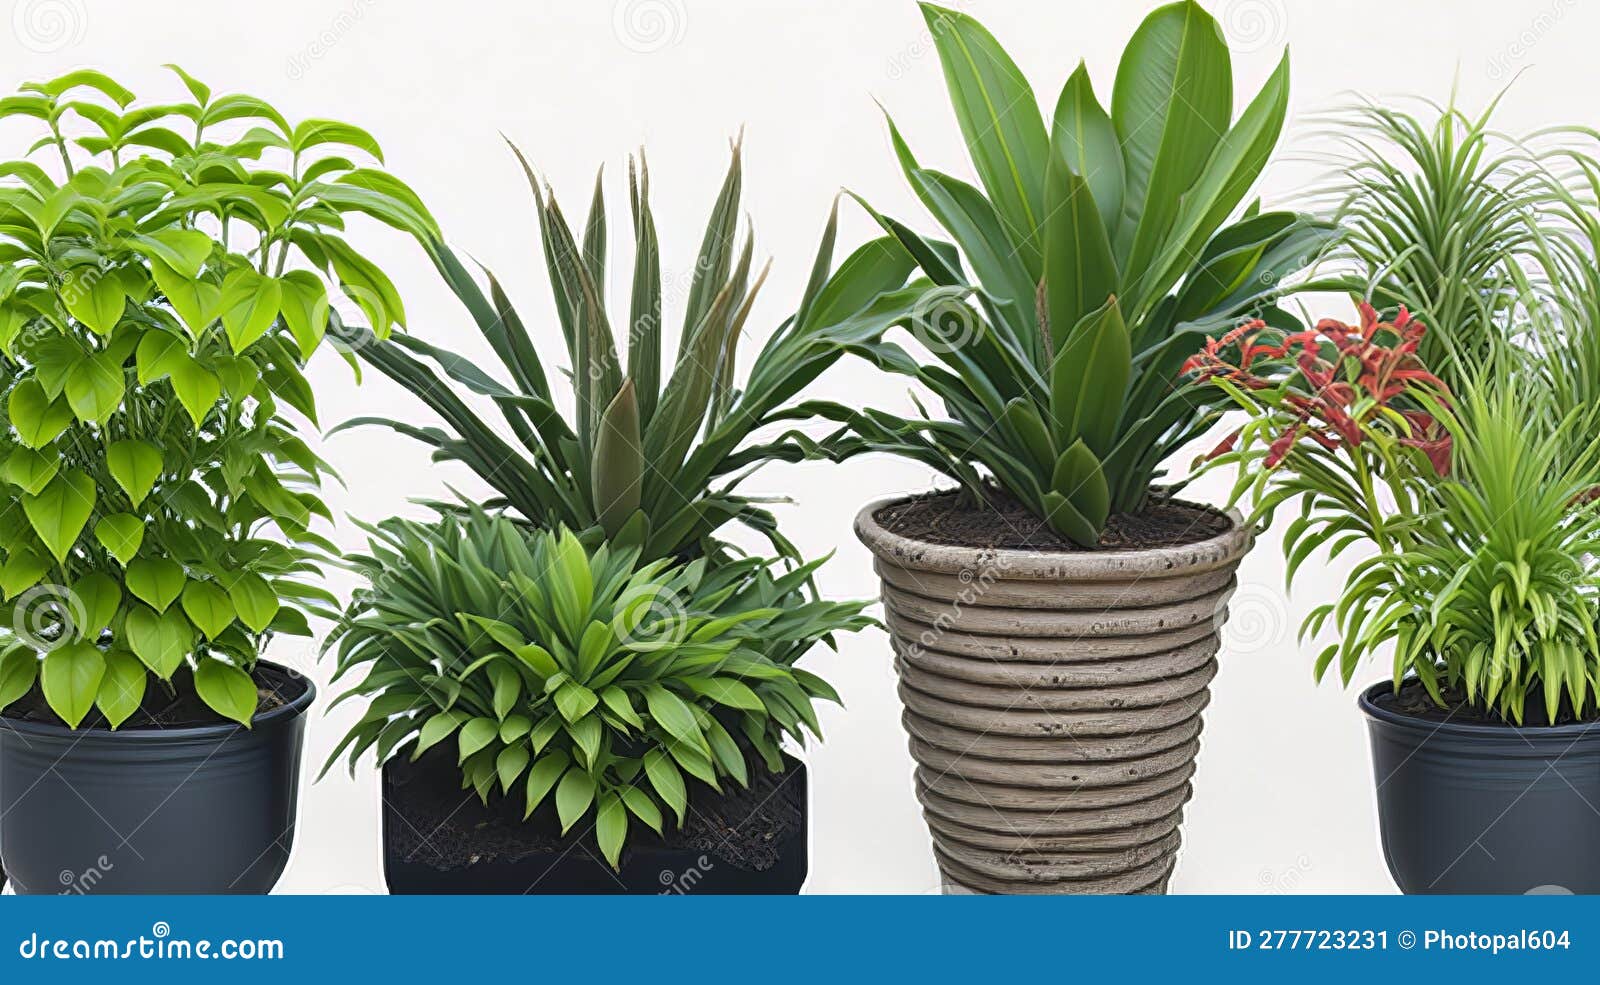 the assemblage of potted decorative plants.